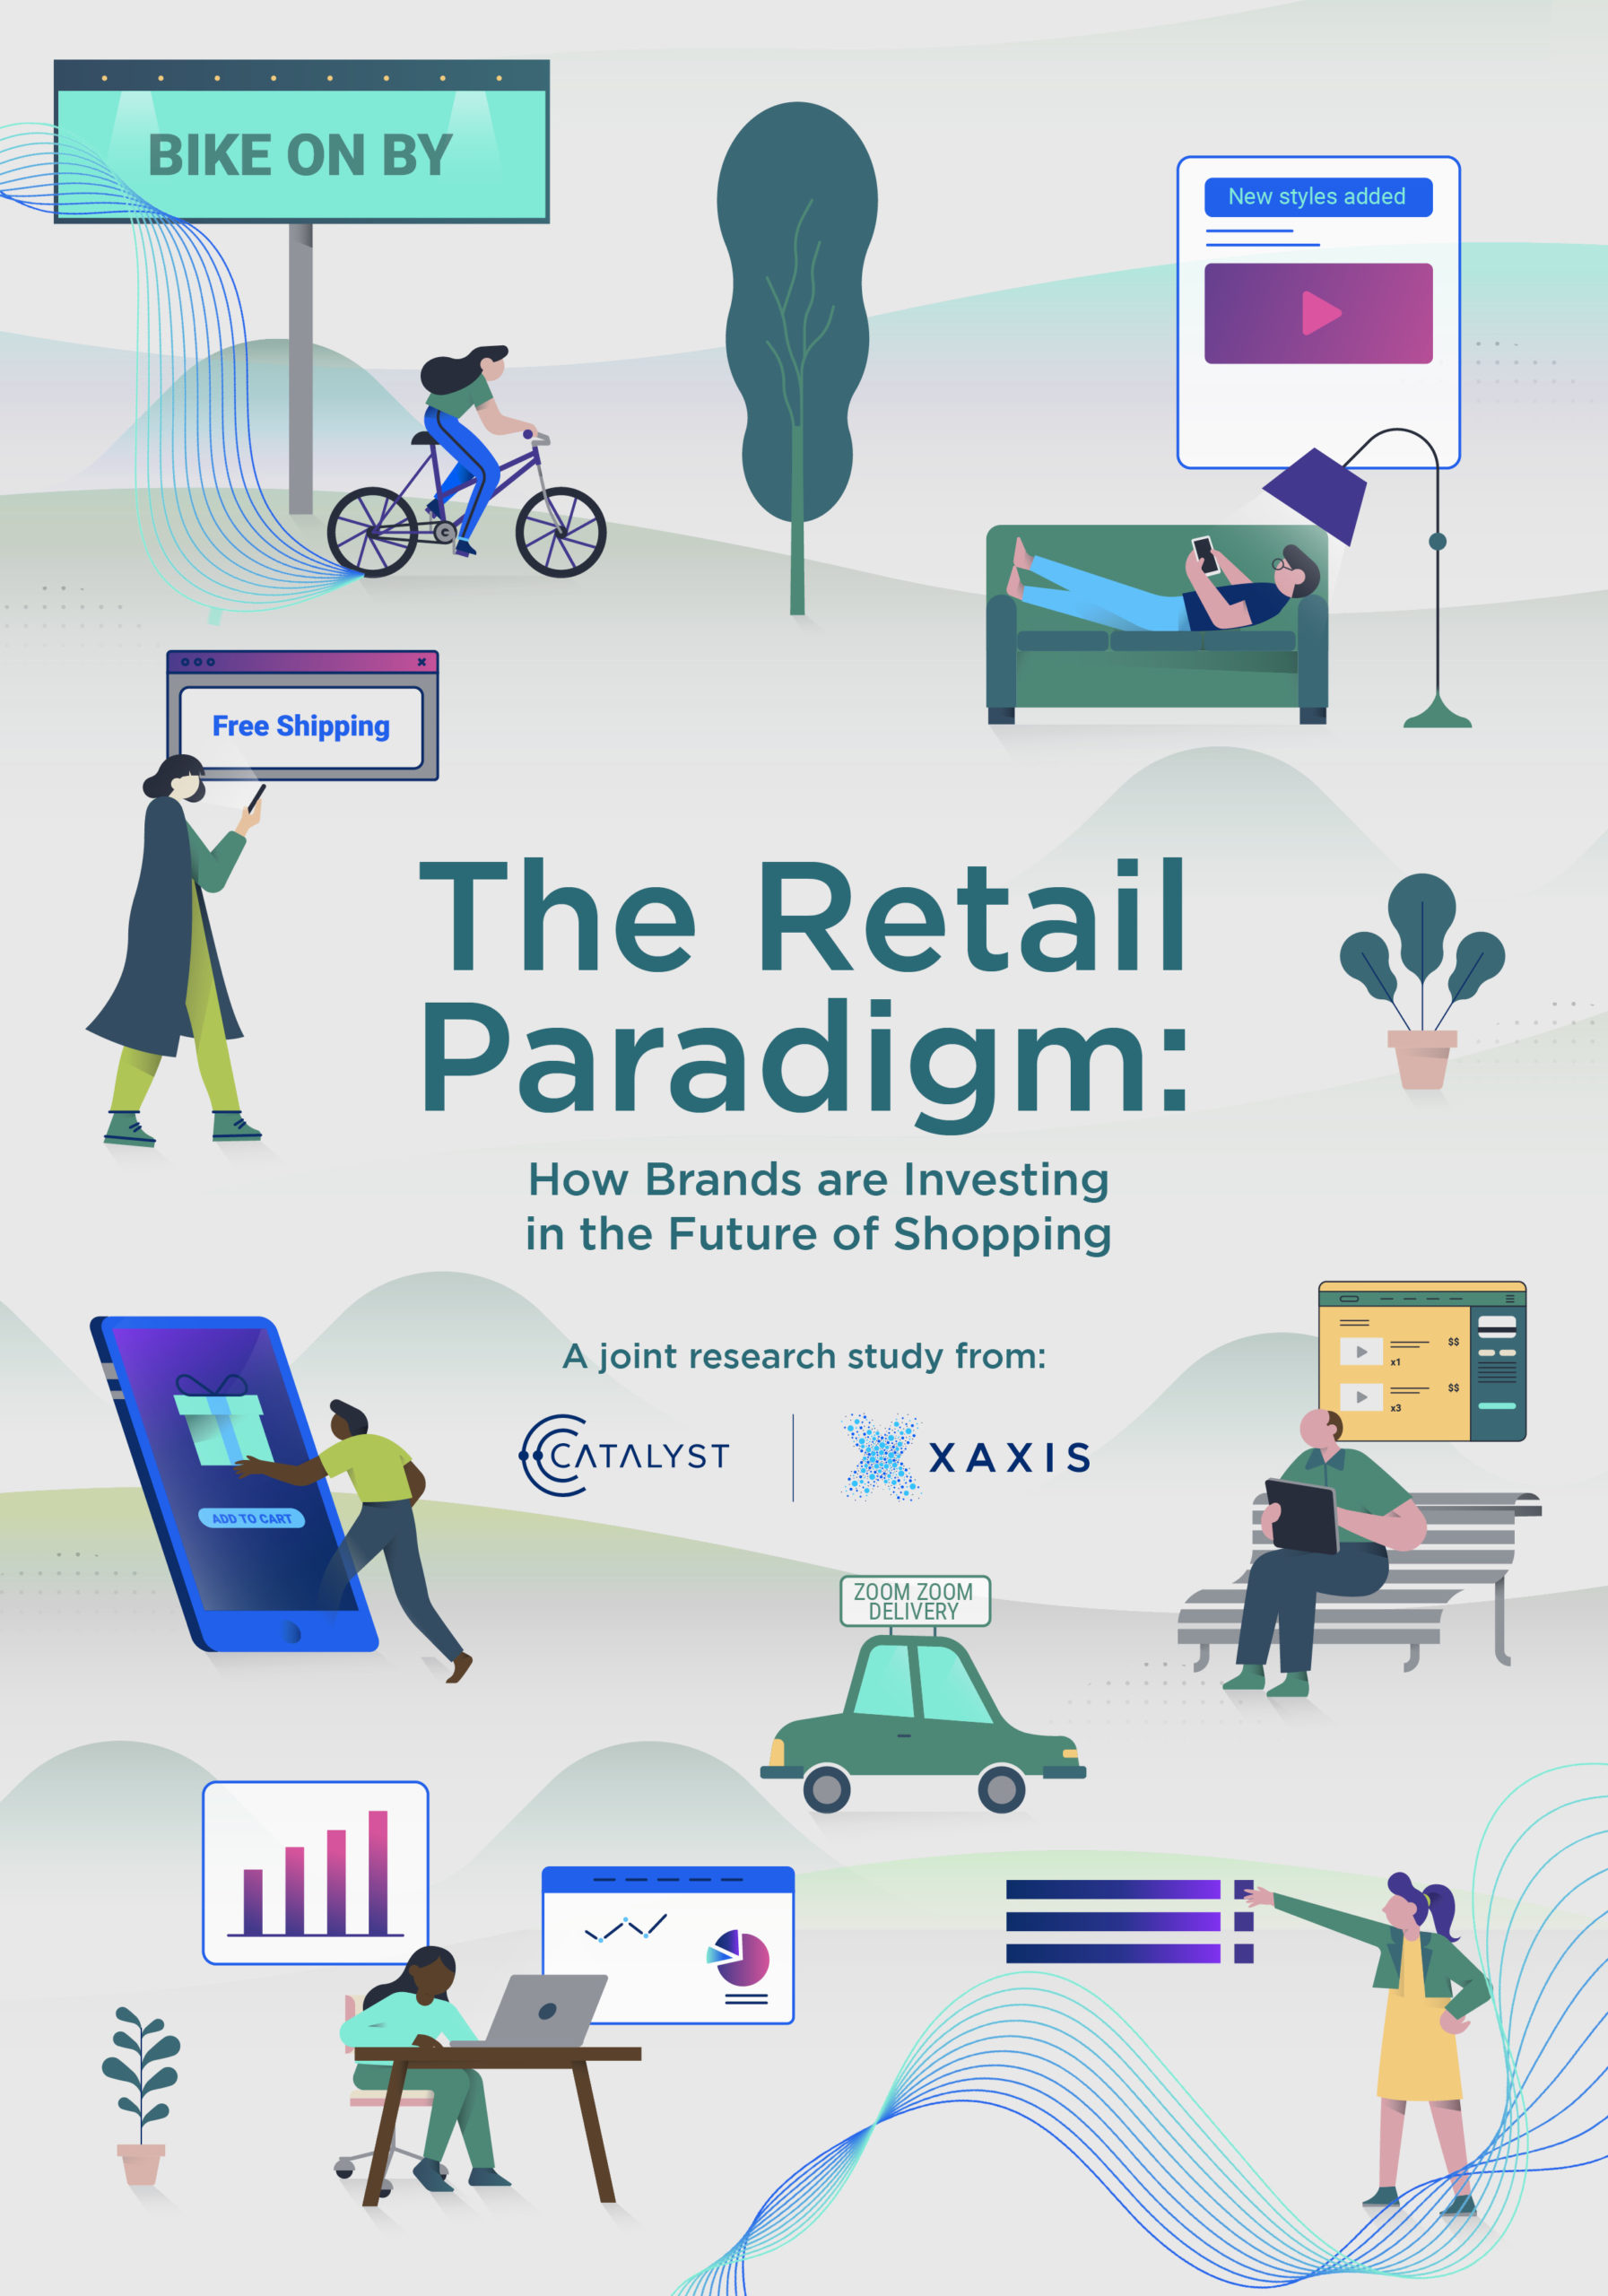 The New Retail Paradigm: How Brands Are Investing in the Future of Shopping